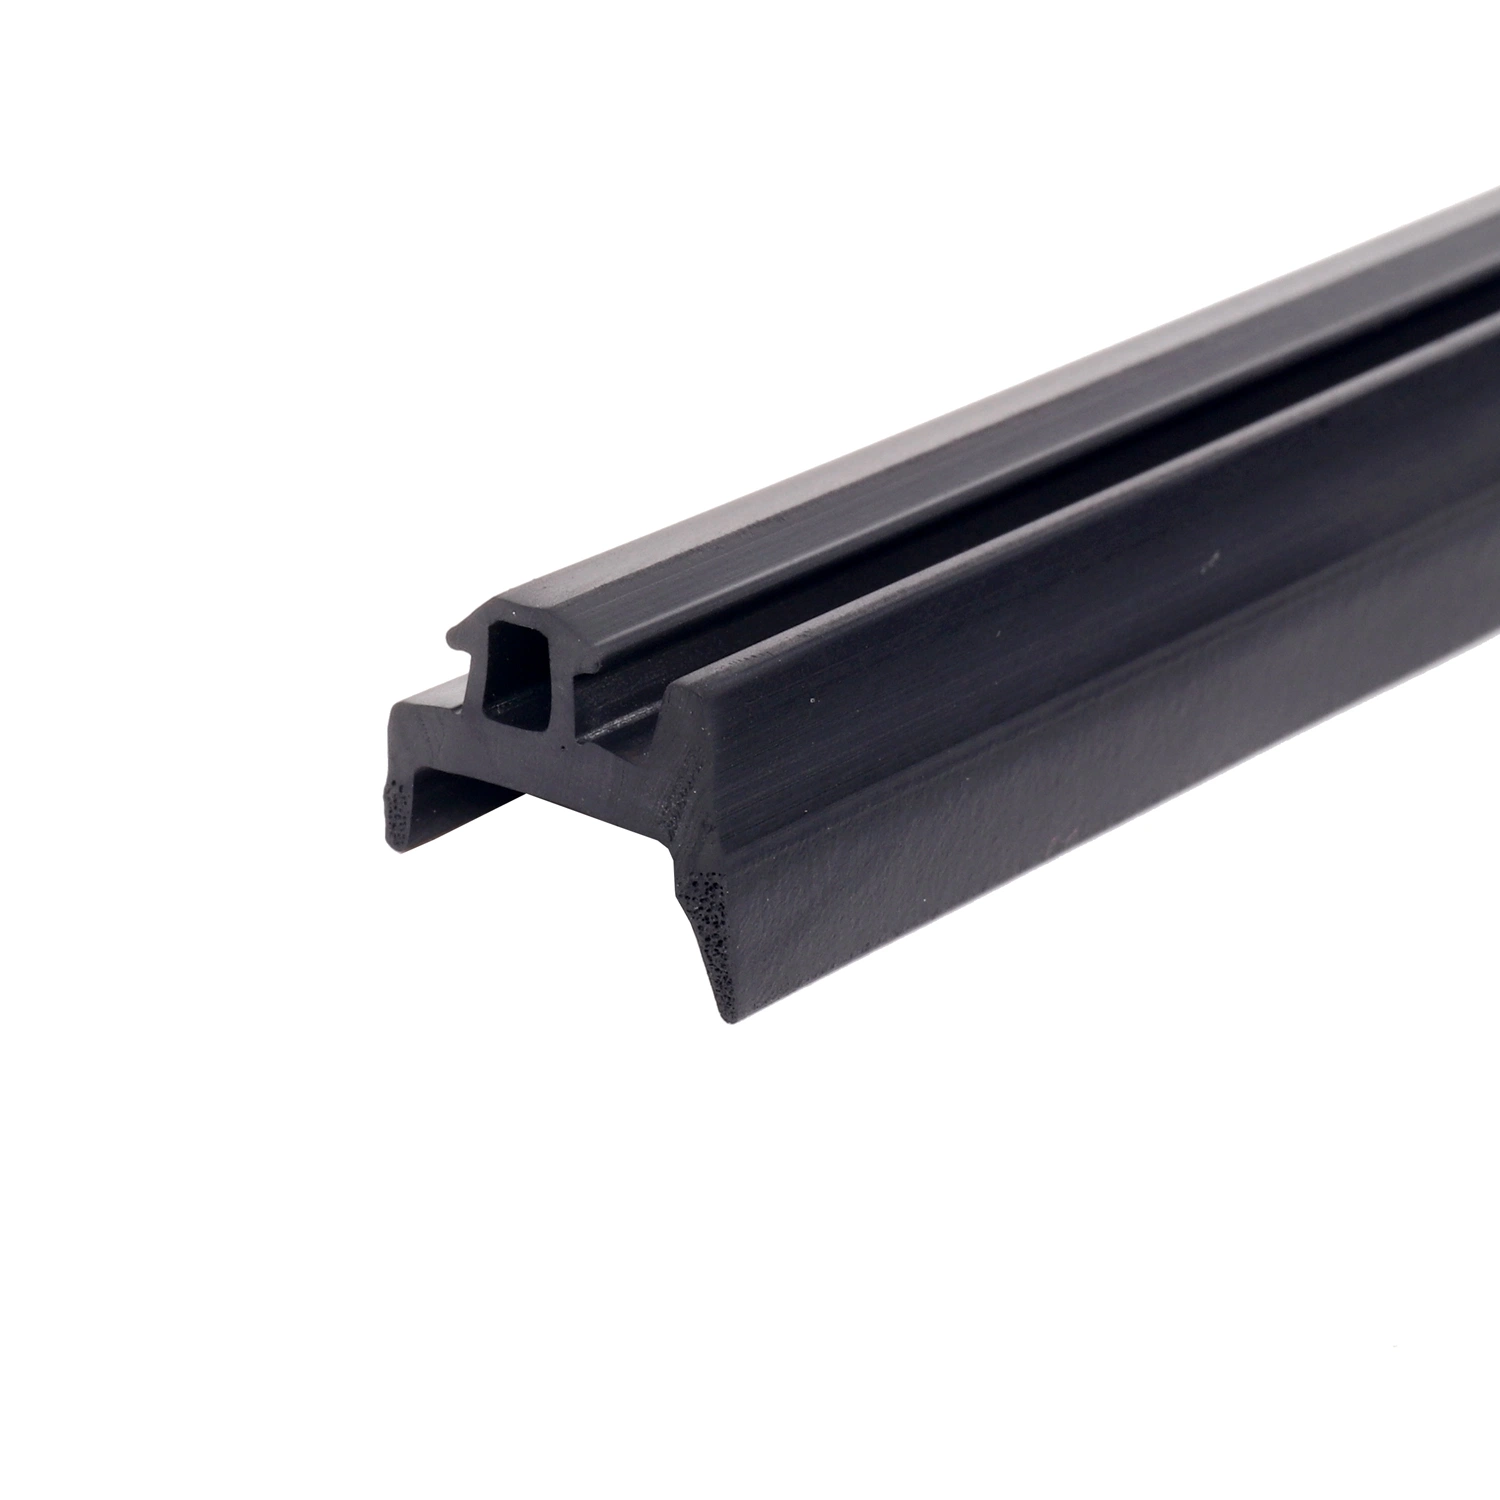 EPDM/PVC/Silicone/Foam Water Proof Rubber Sealing